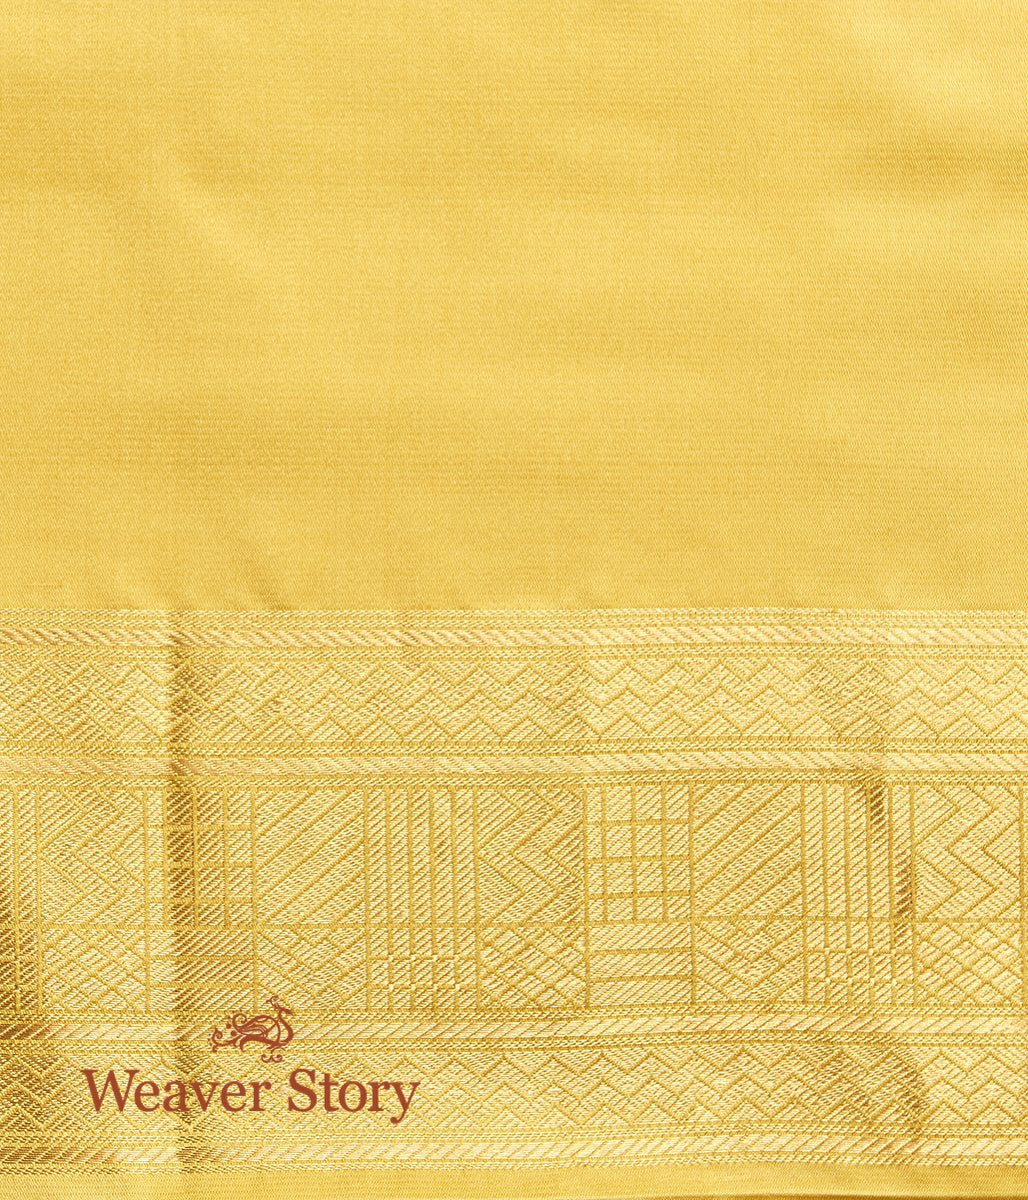 Handwoven_Yellow_Tanchoi_Saree_with_Gold_Border_WeaverStory_05